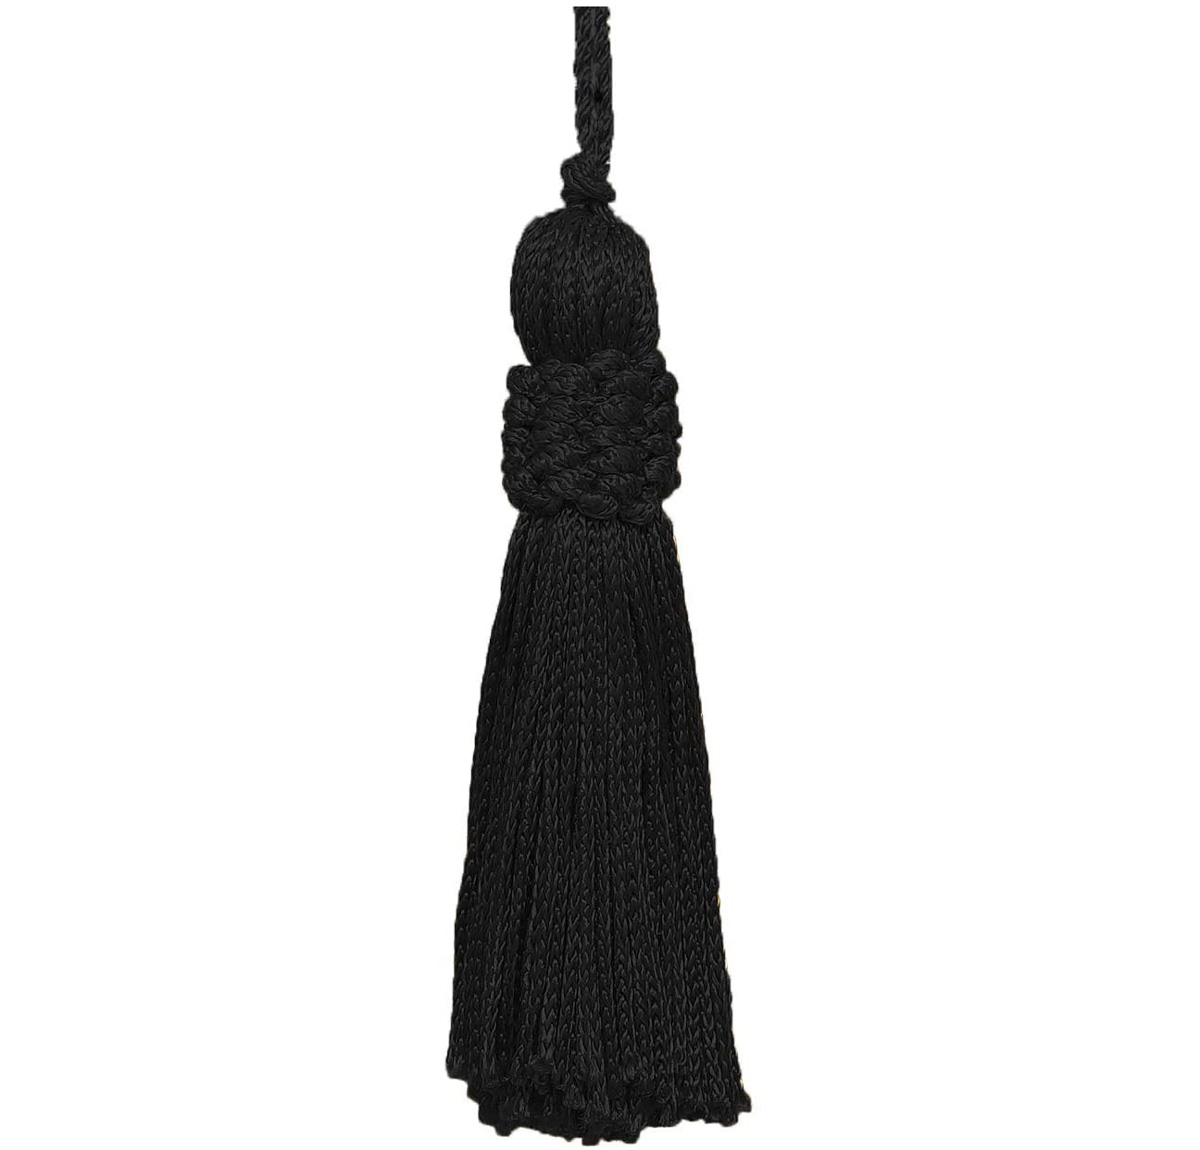 Black Crown Head Chainette Tassel, 3 Inch Long with 2 Inch Loop, Basic Trim Collection 